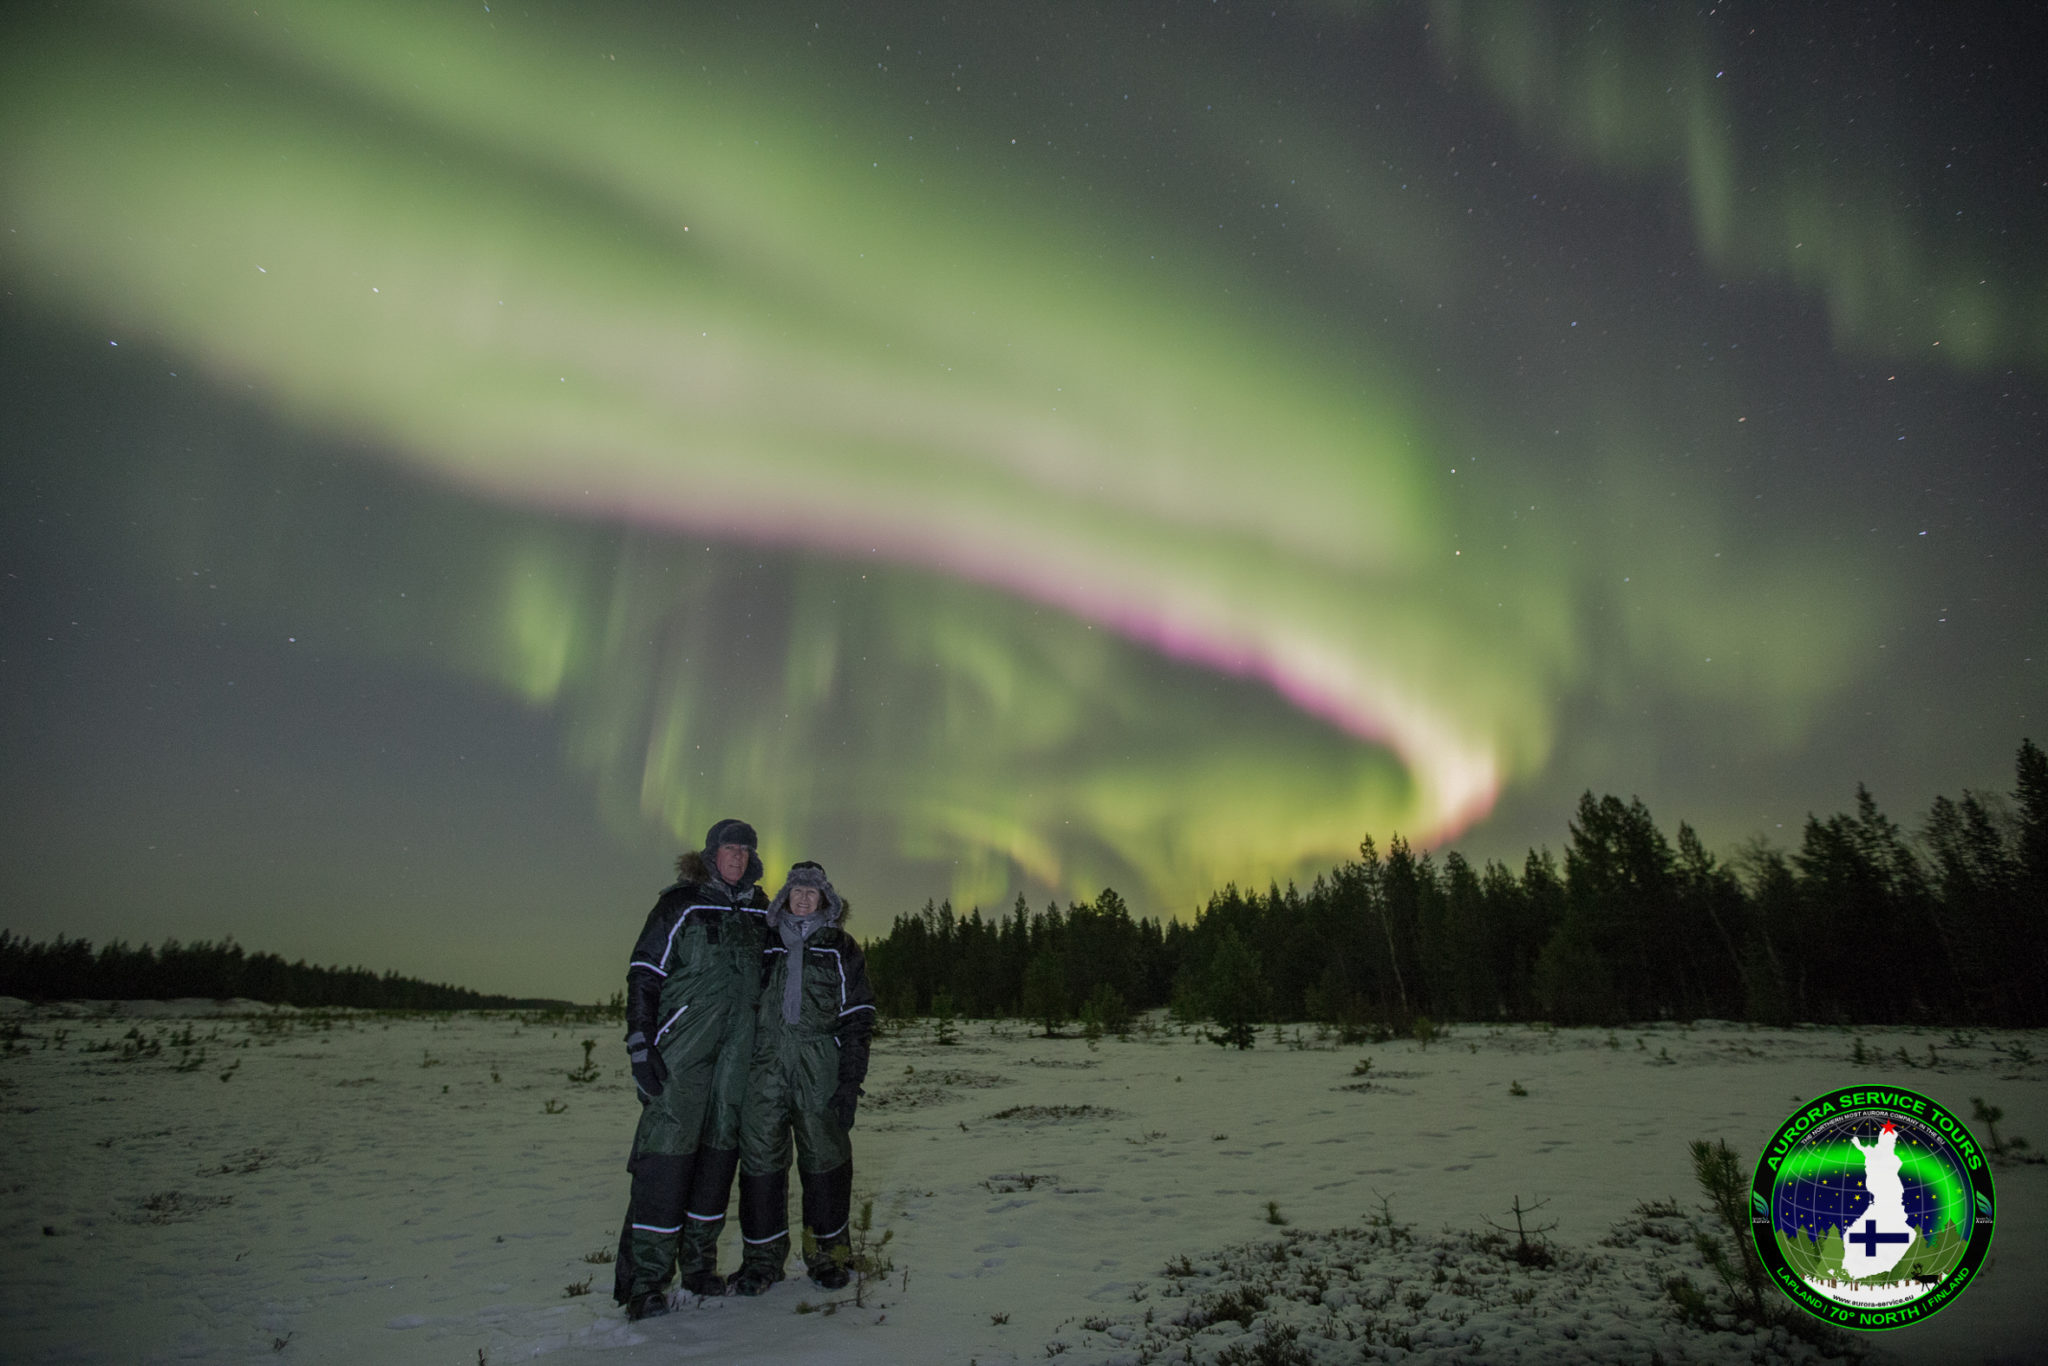 Epic Northern lights flying above Lapland